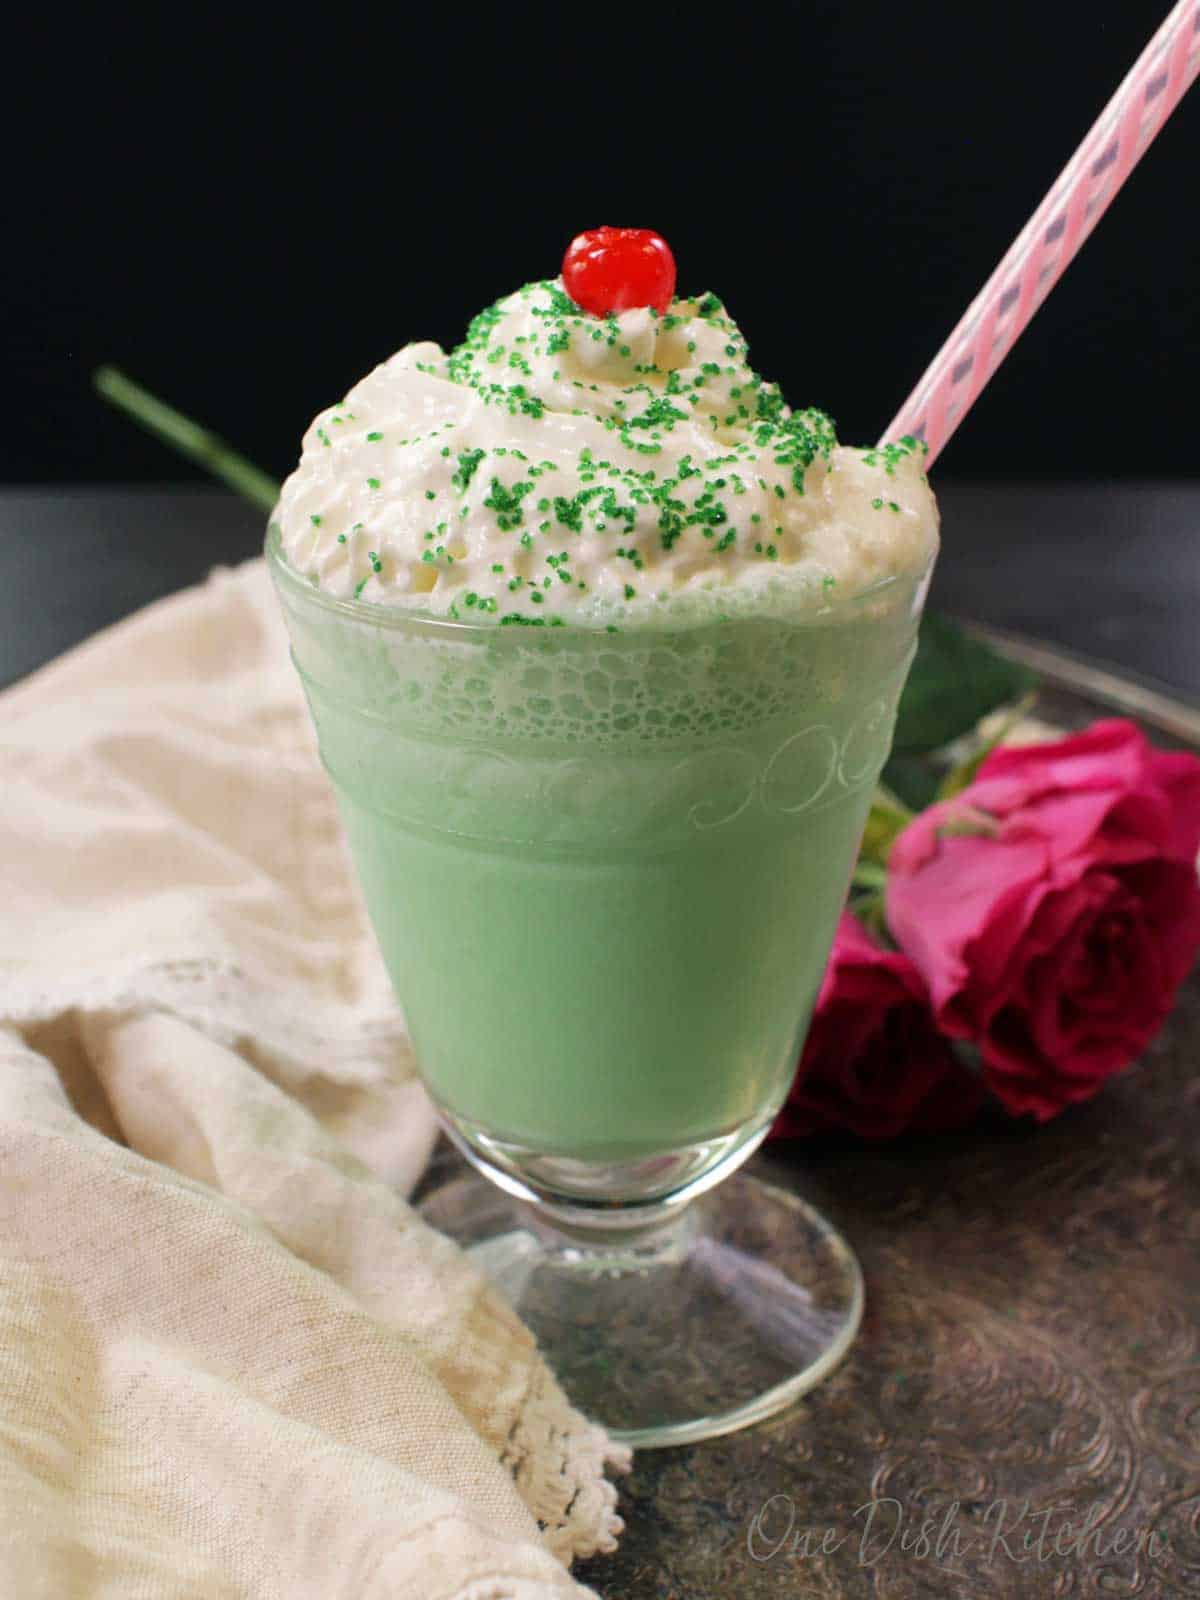 A shamrock shake in a tall dessert glass topped with whipped cream, green sprinkles, and a maraschino cherry.